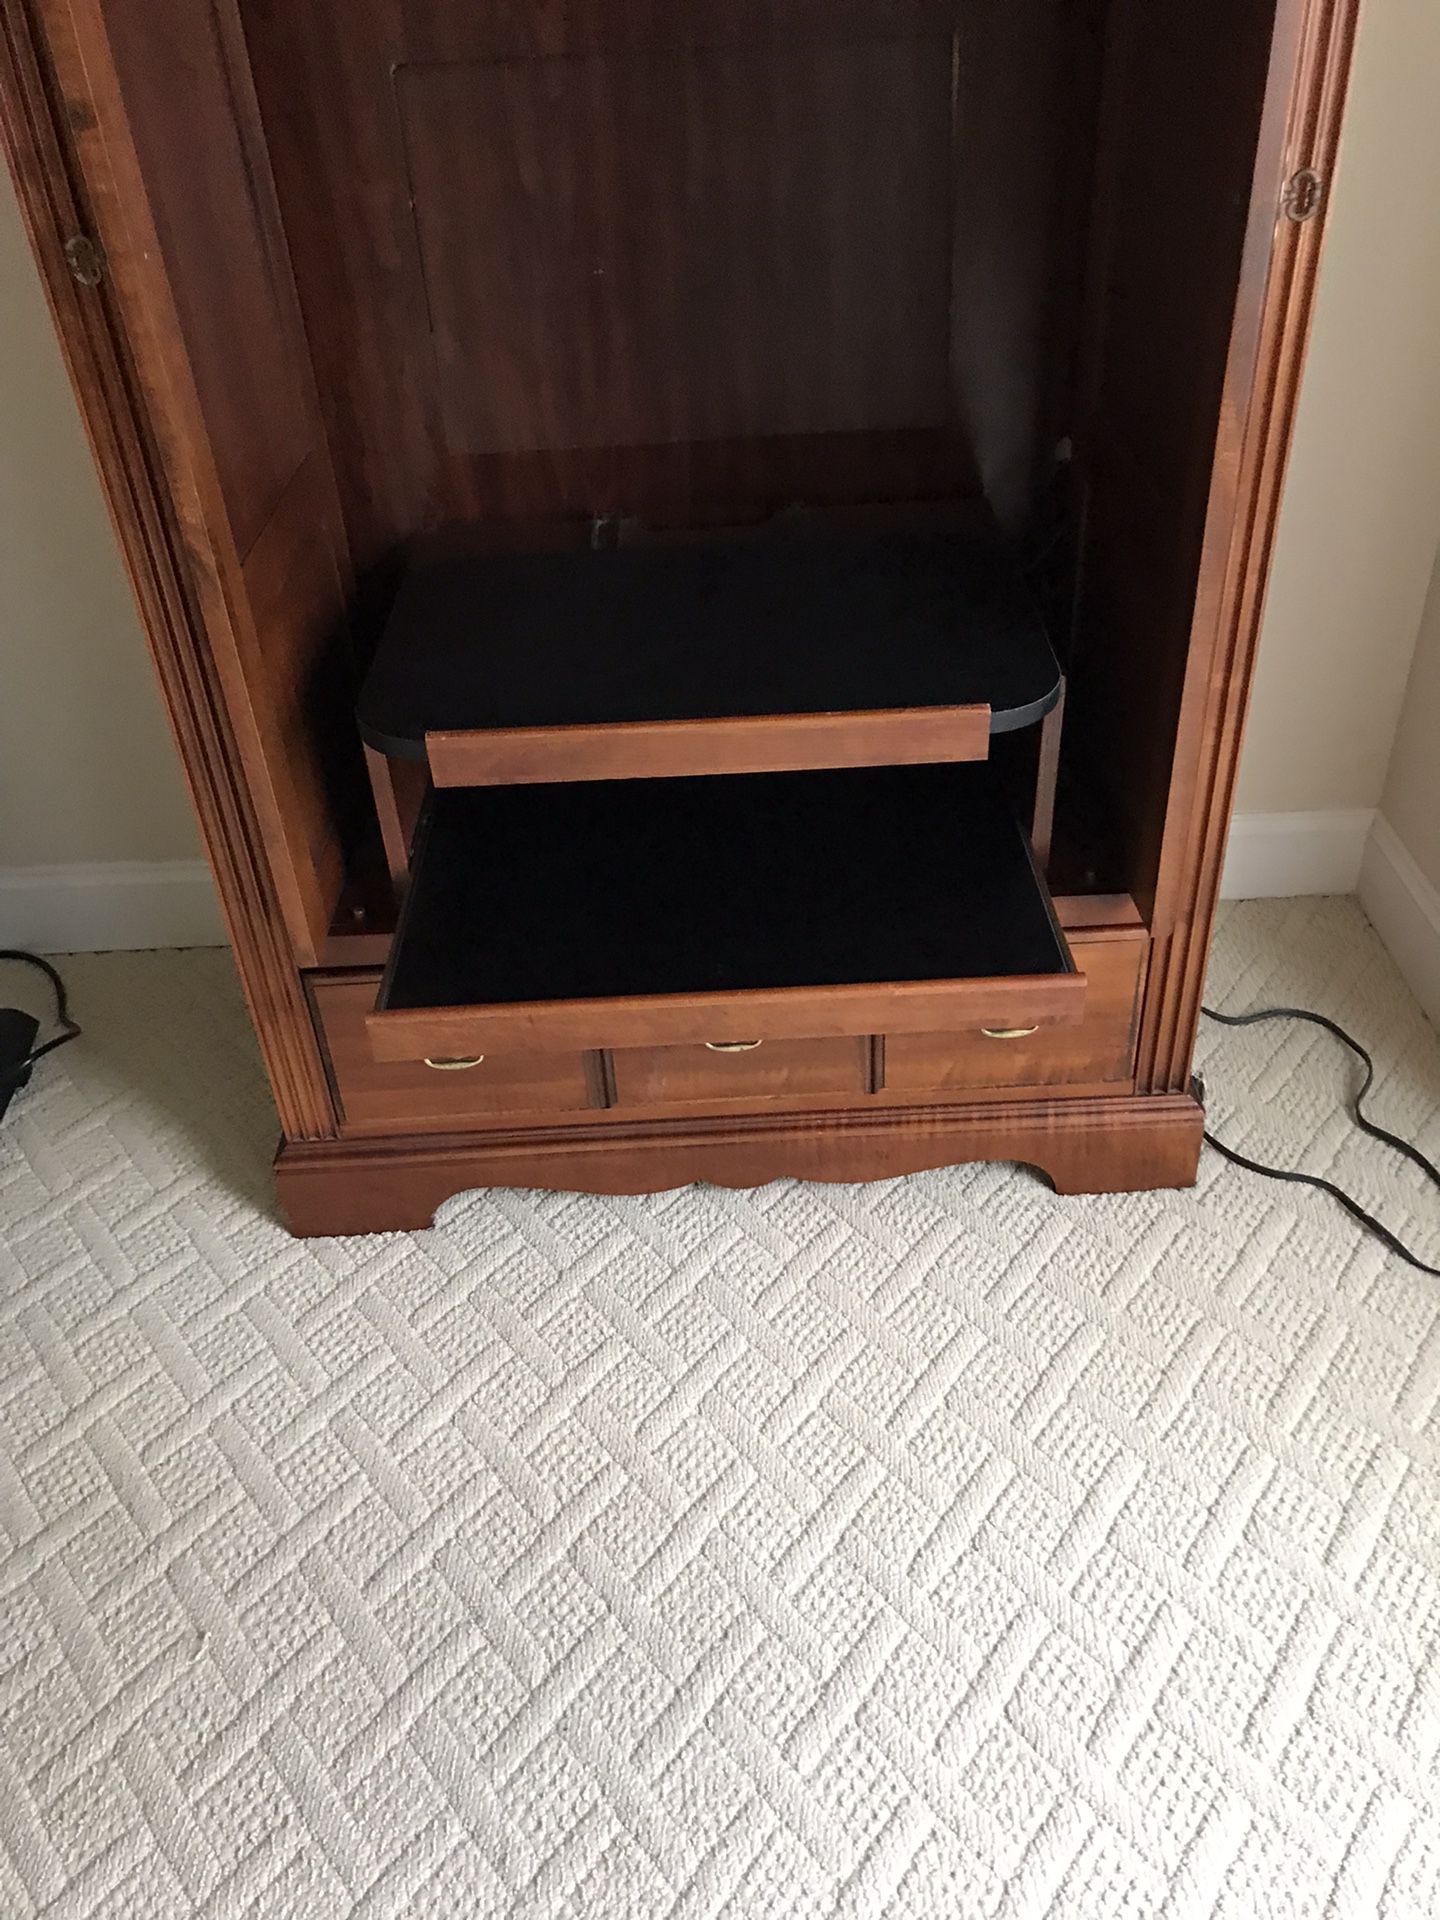 TV, DVD, CD Player Armoir Or Cabinet. 2 Shelves Slide Out With Full Length Drawers For Storage With Pocket Doors, Very Good Condition N Very Nice Piec